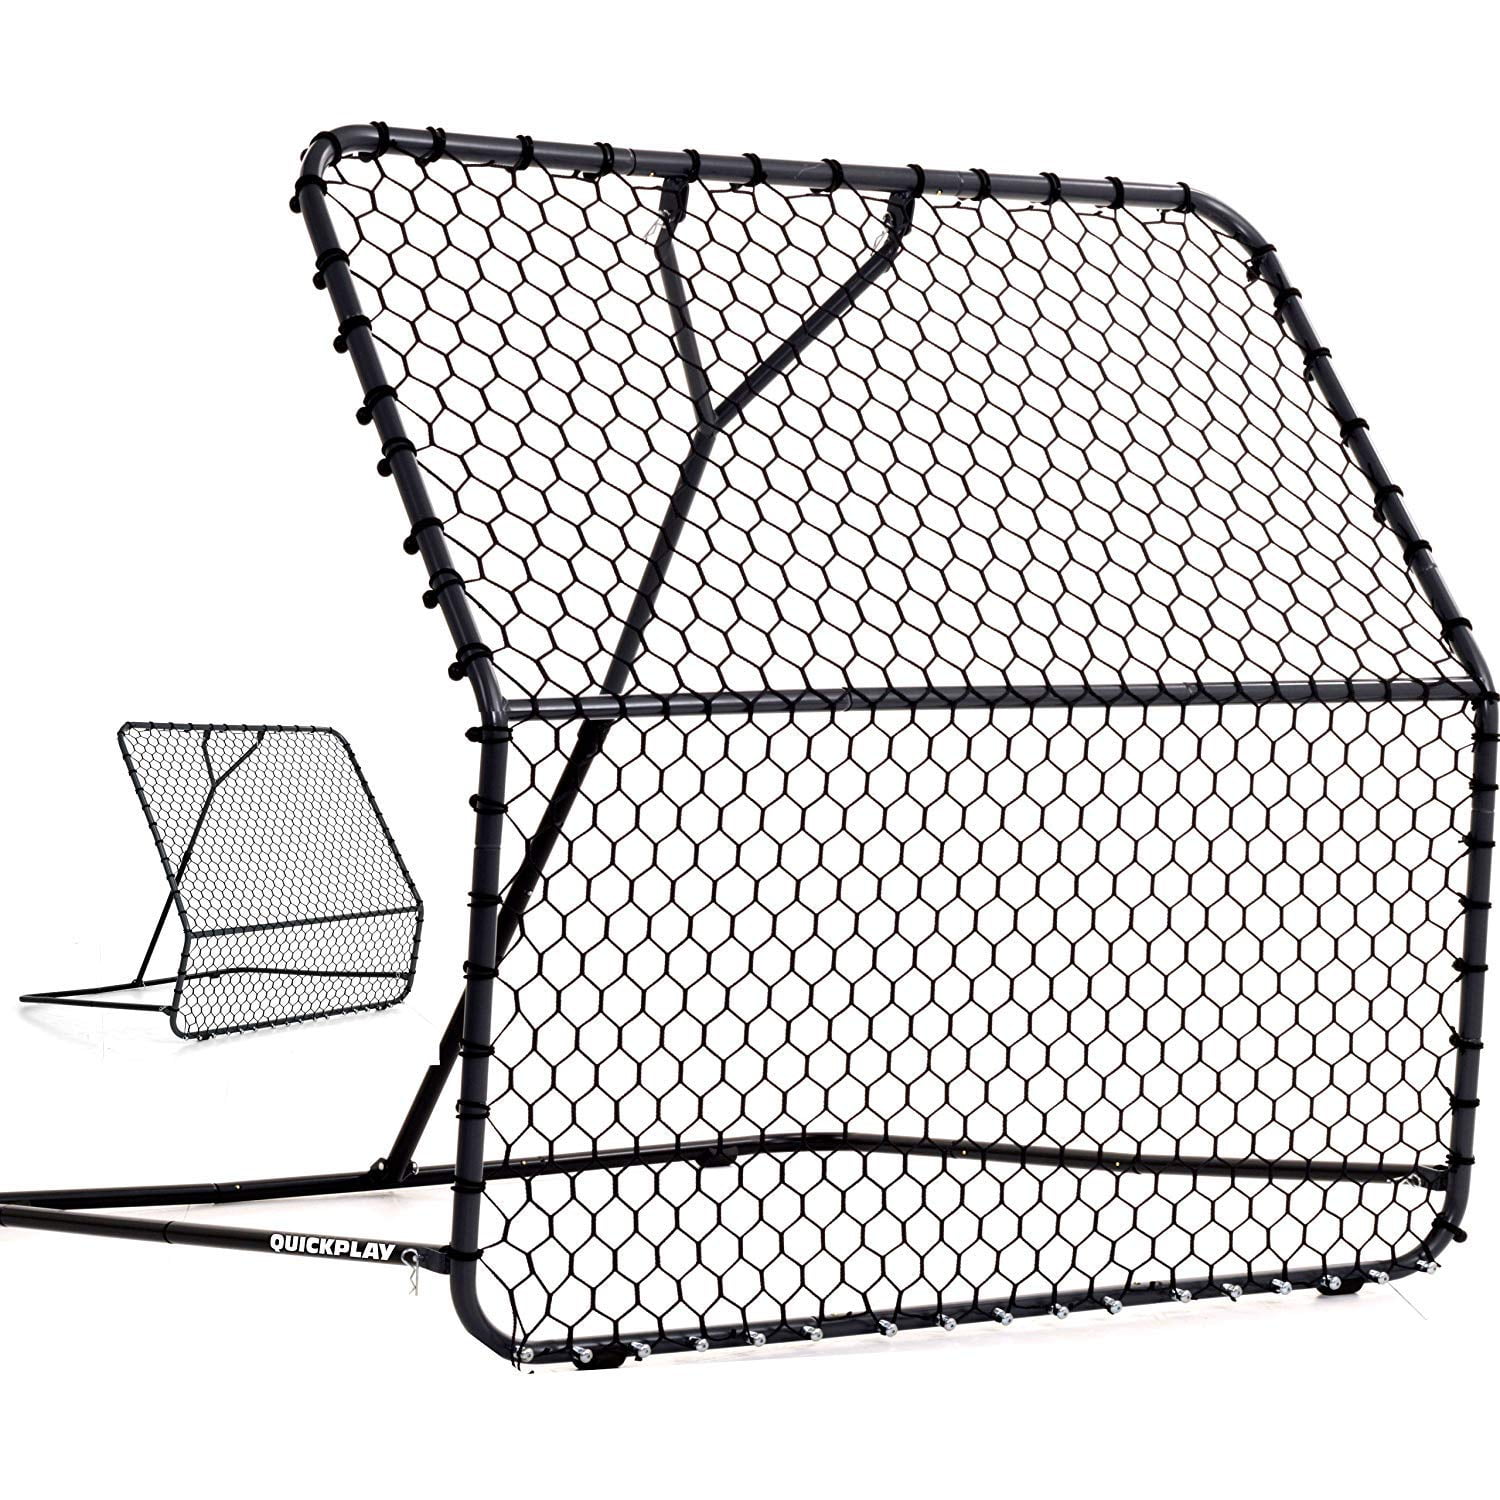 Details about   QuickPlay PRO Rebounder Adjustable Angle Soccer Trainer Open Box Deal 